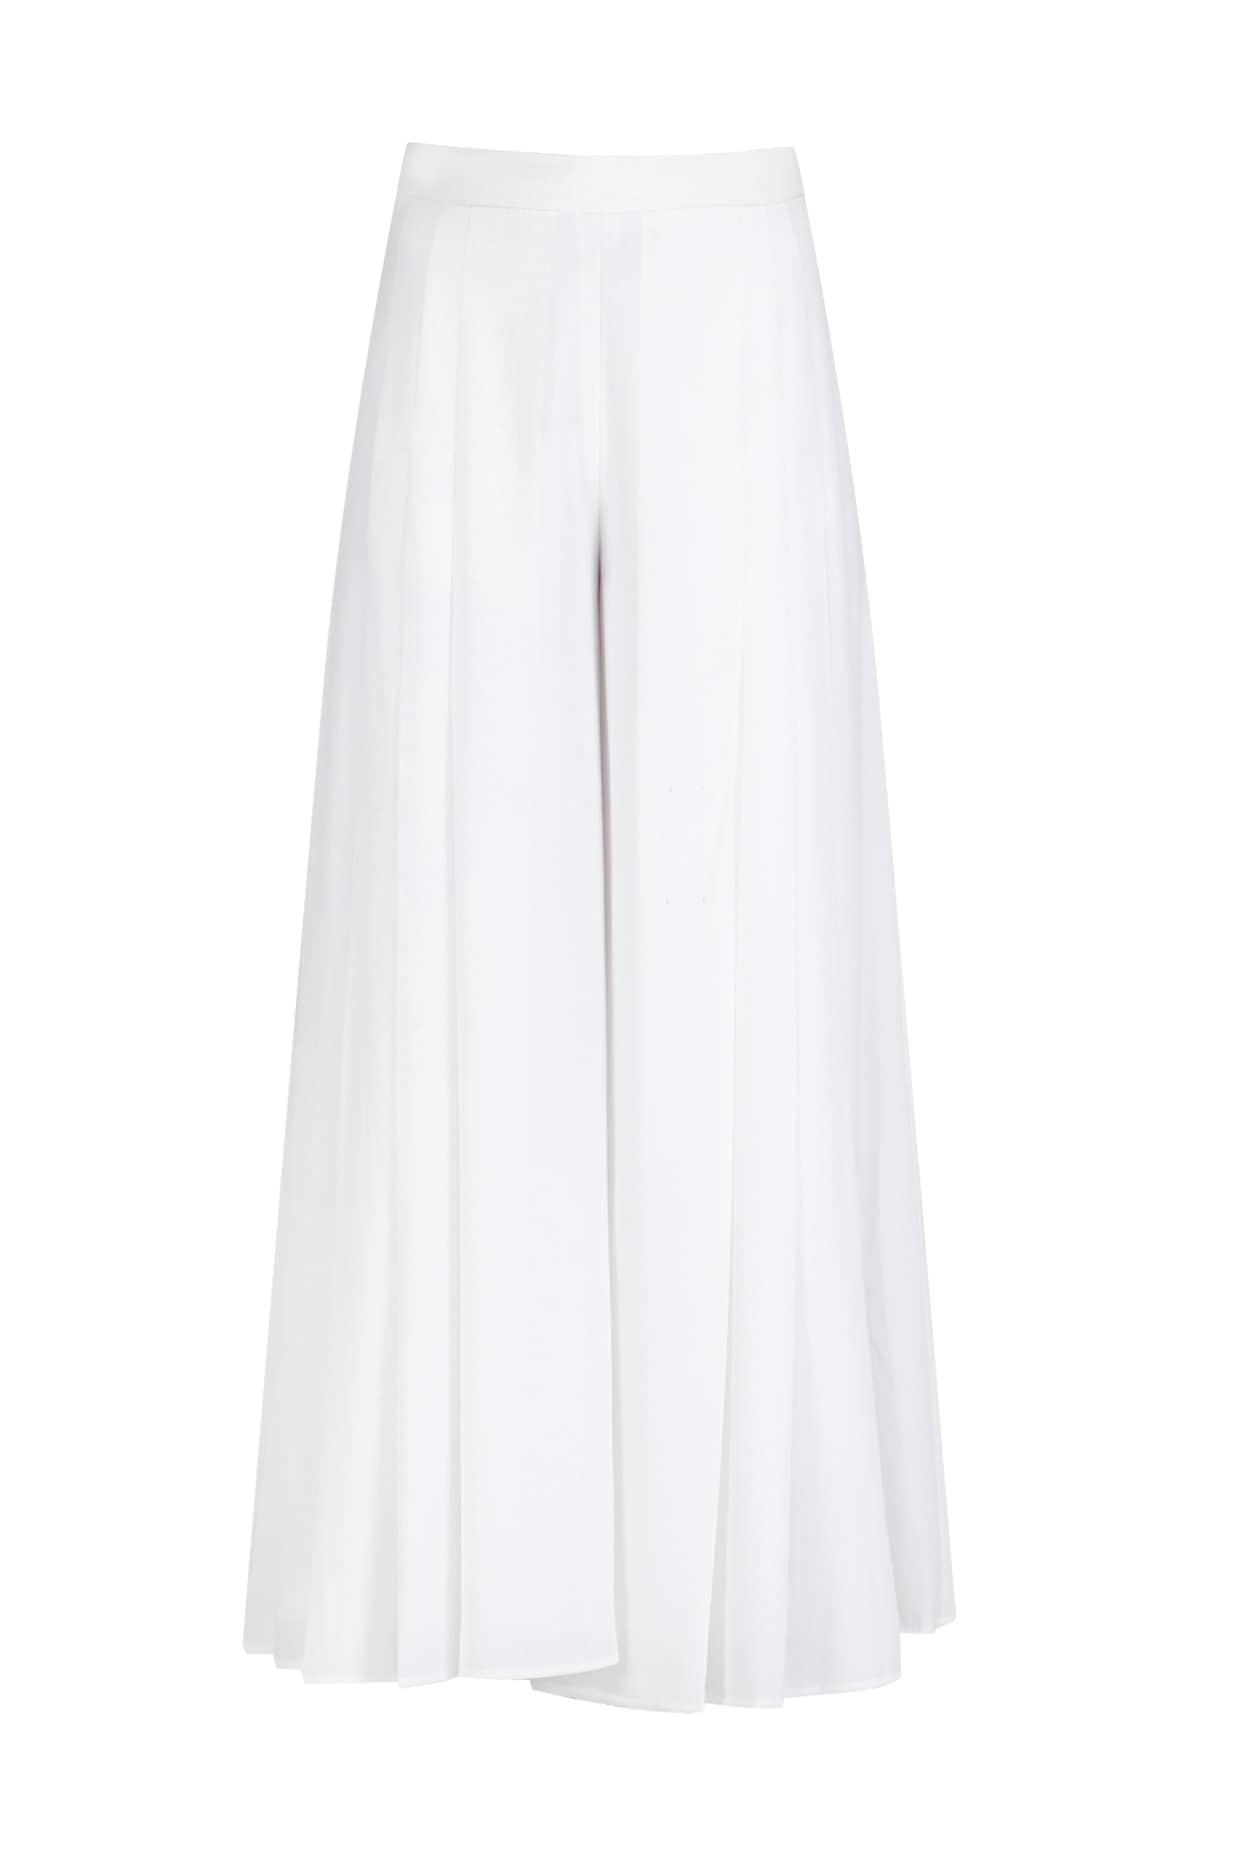 Party Wear Cotton Off White Mirror Work Palazzo, Waist Size: 28inch, Wide  at Rs 350 in New Delhi